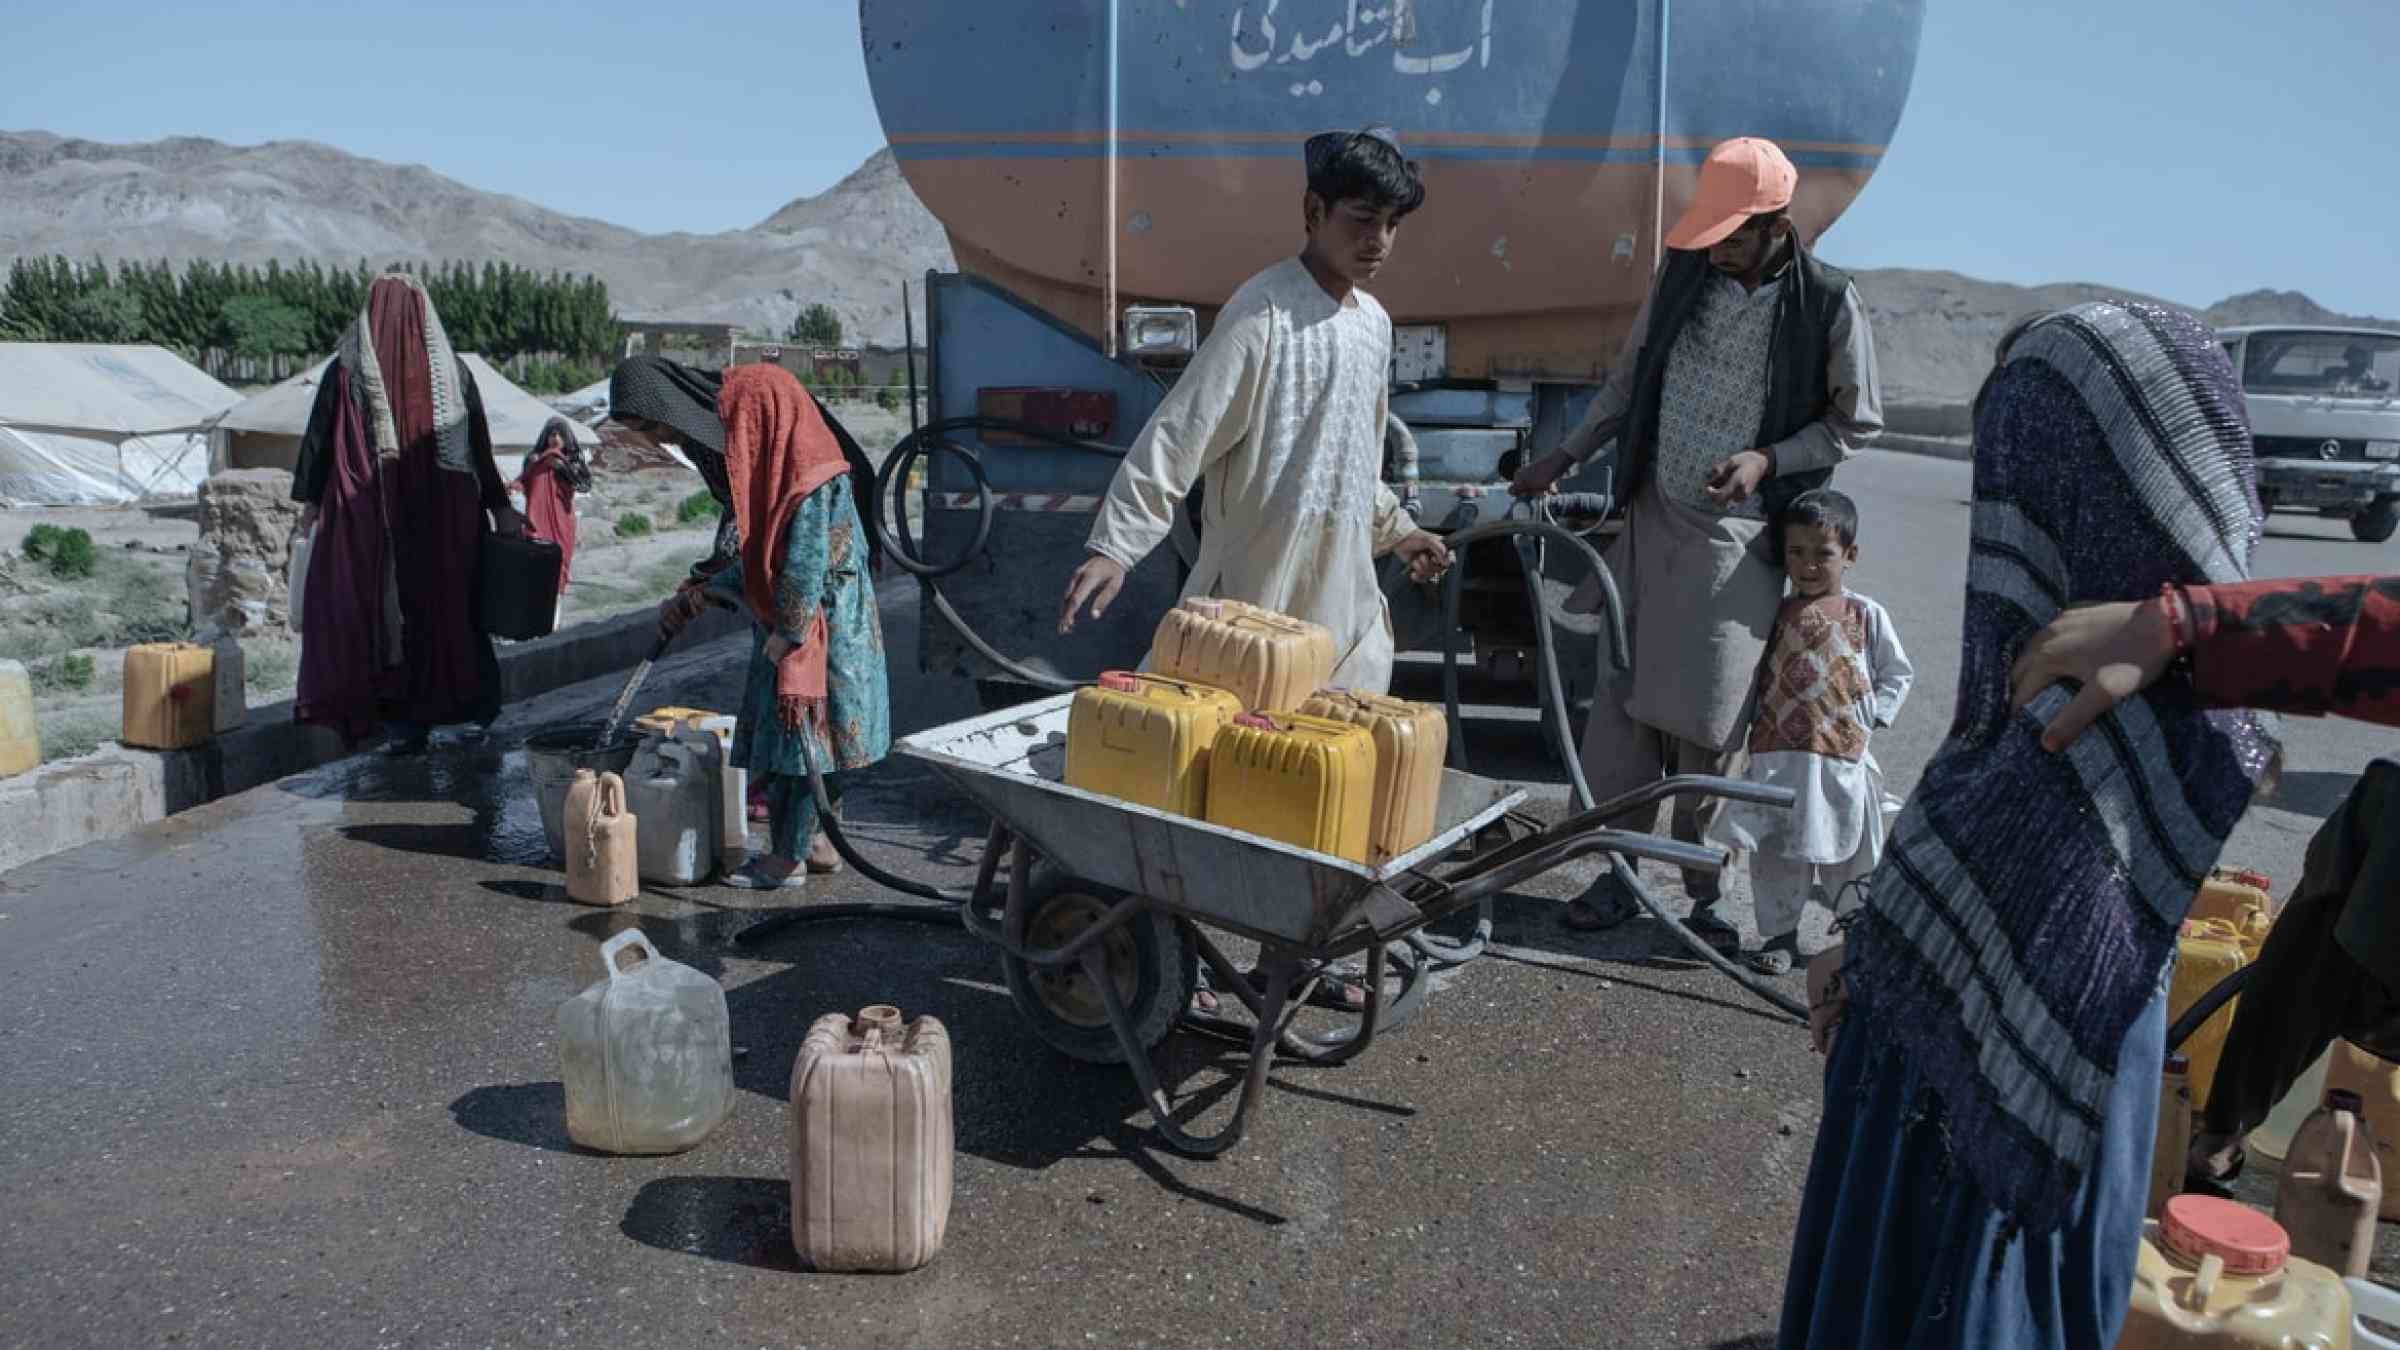 The drought-displaced Afghan children fill water containers to carry to their tents from a tanker at a camp for internally displaced people on the outskirts of Herat province, Afghanistan (2019)